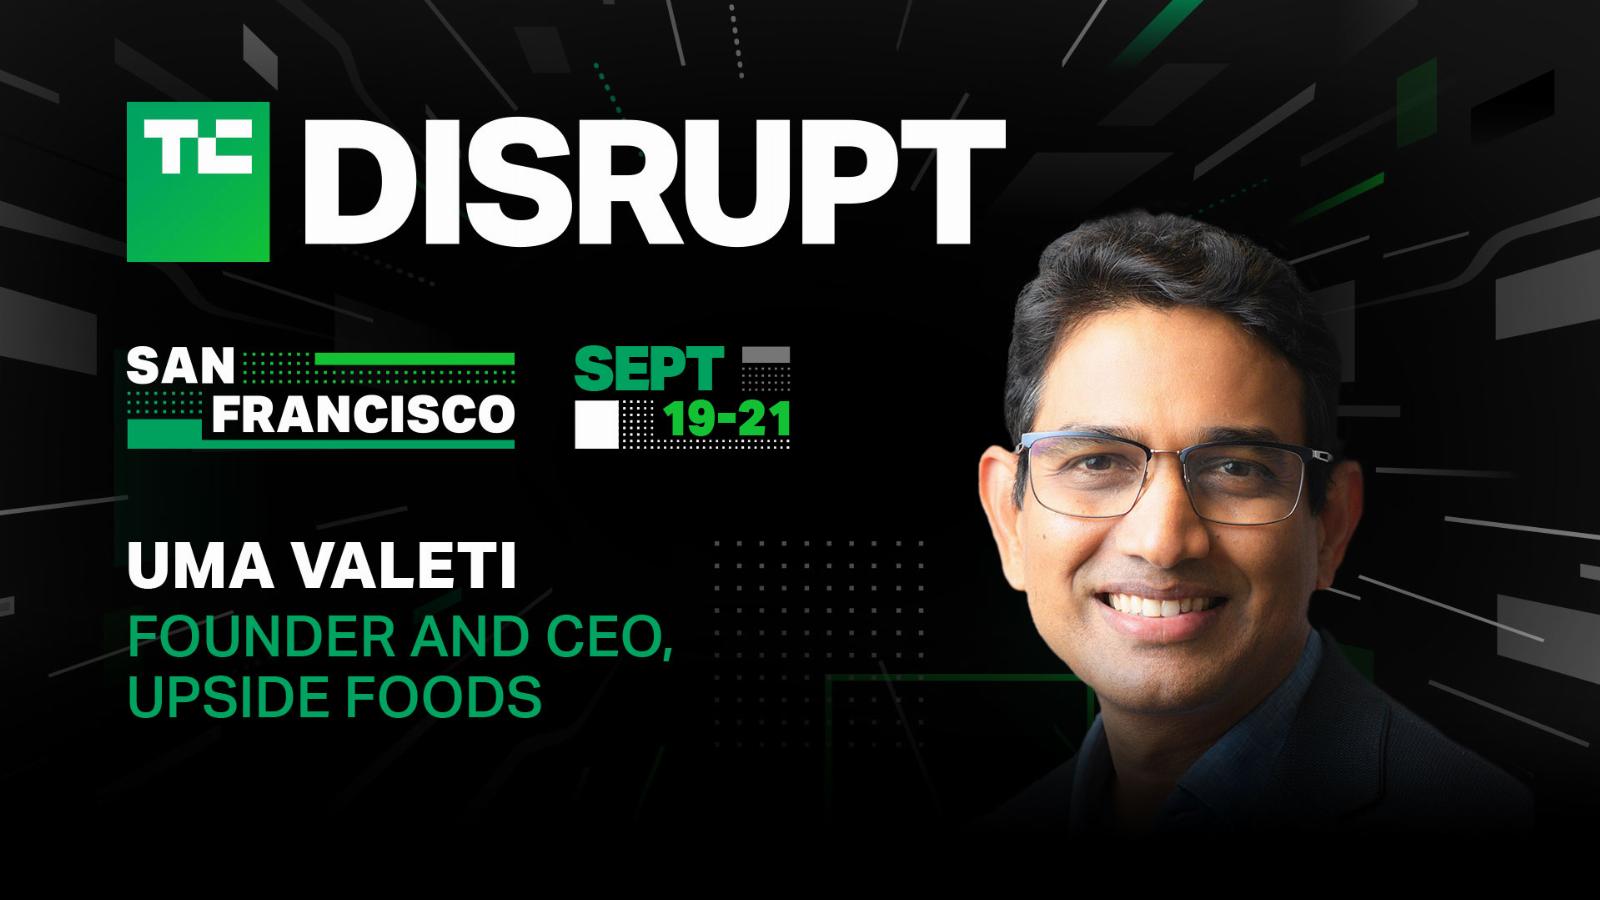 Upside Foods shares its recipe for scaling cultivated meat at TC Disrupt 2023